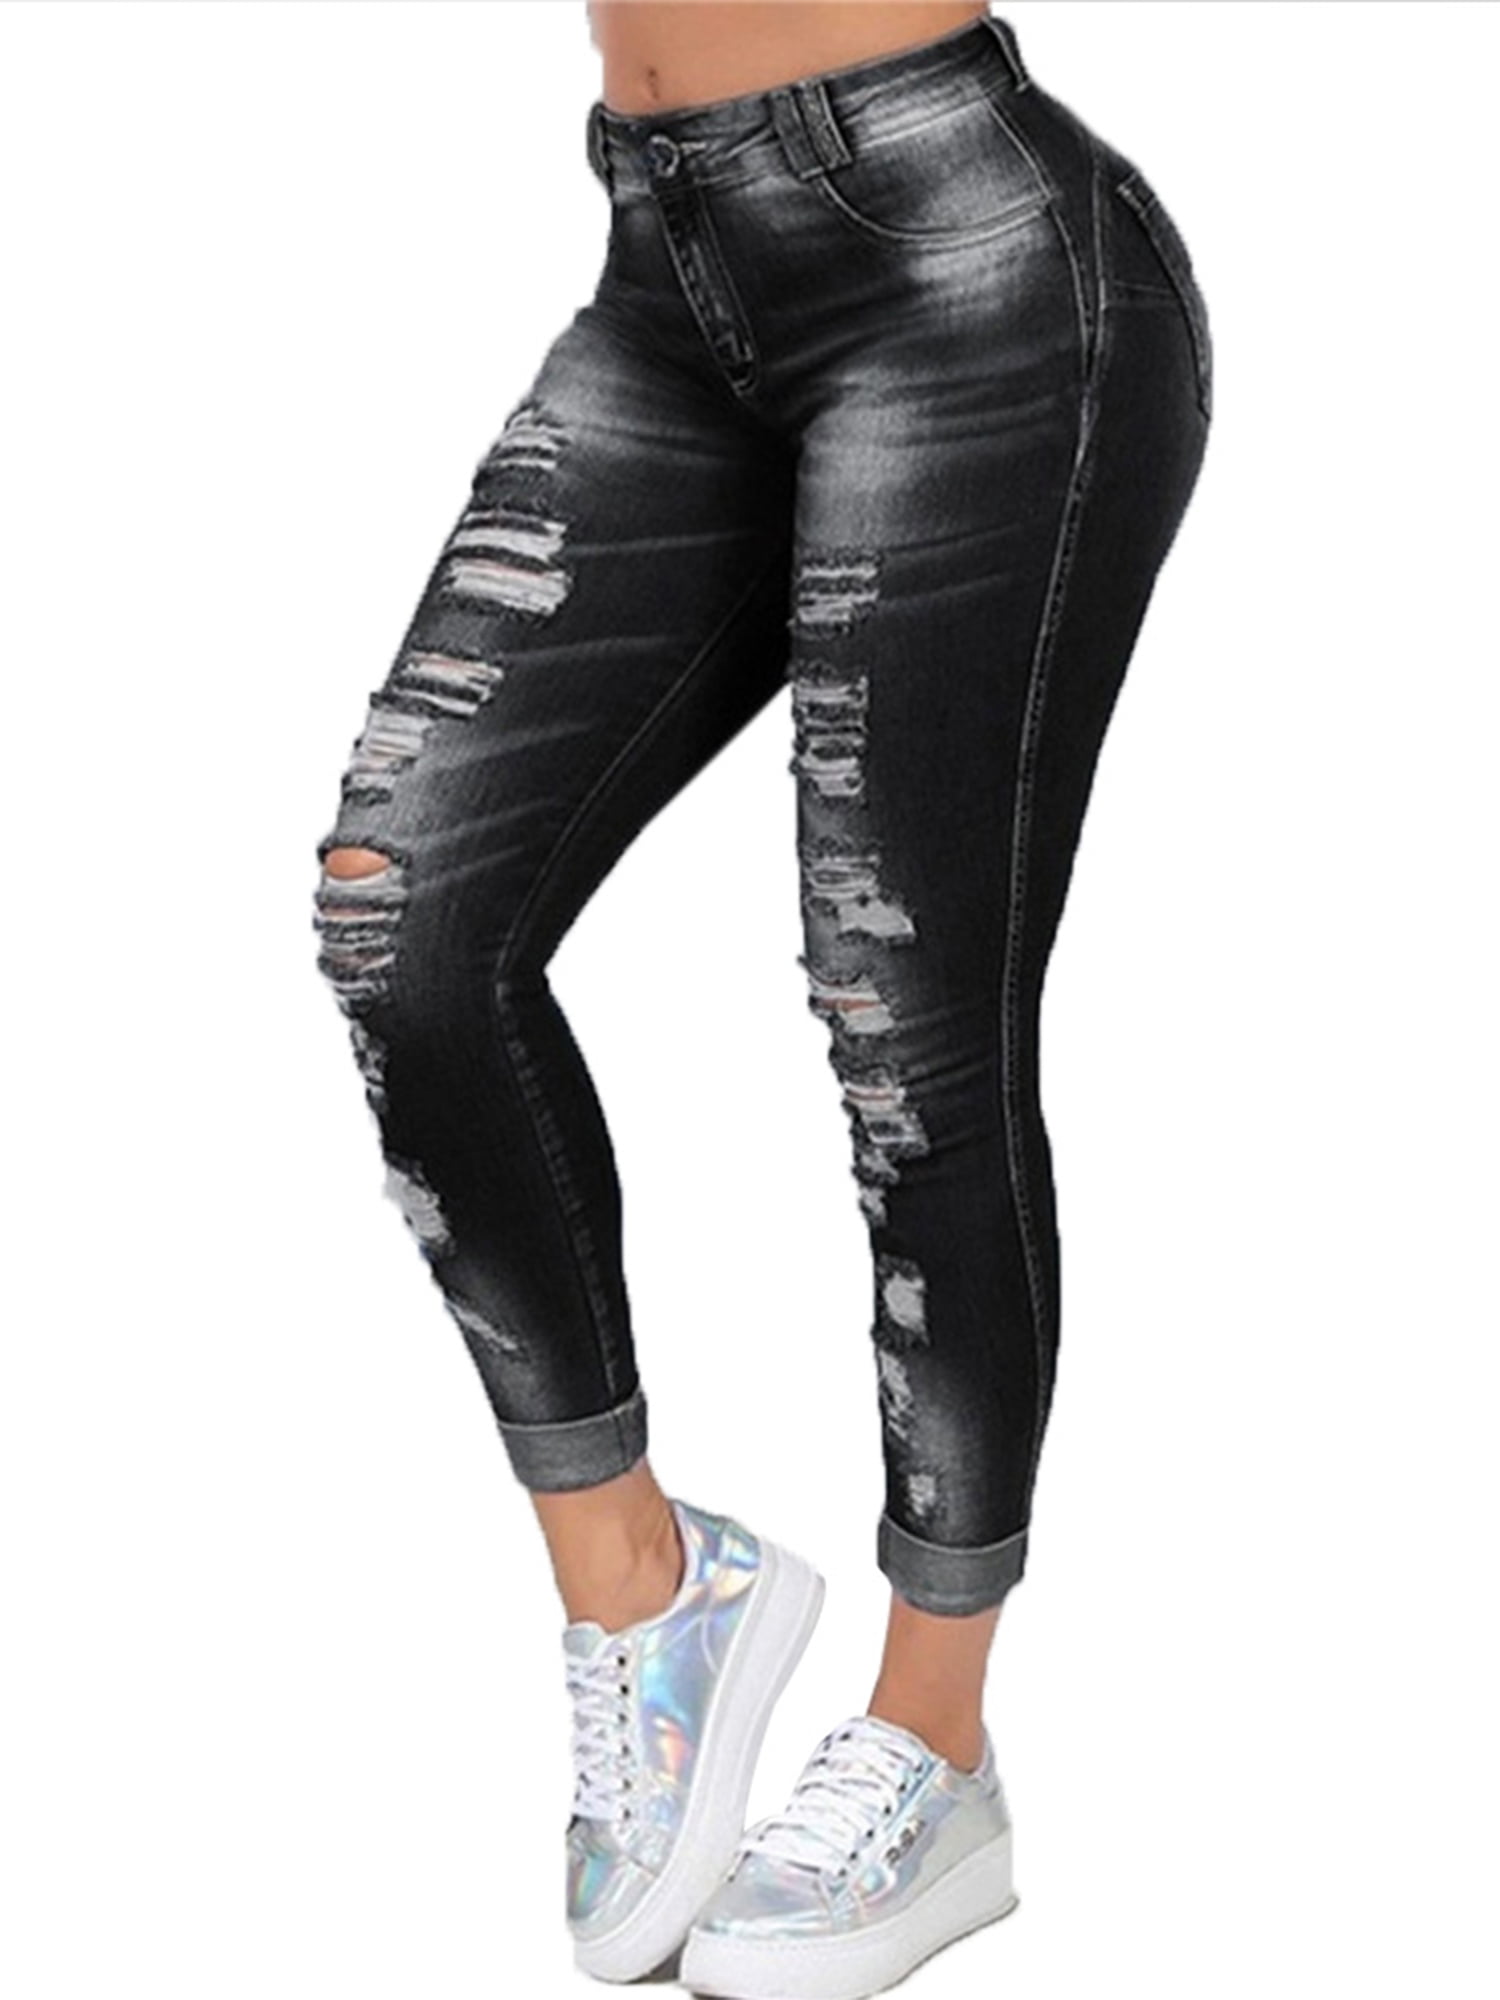 Plus Size Women'S Skinny Distressed Denim Jeans Ripped Jeggings Pants Trousers 